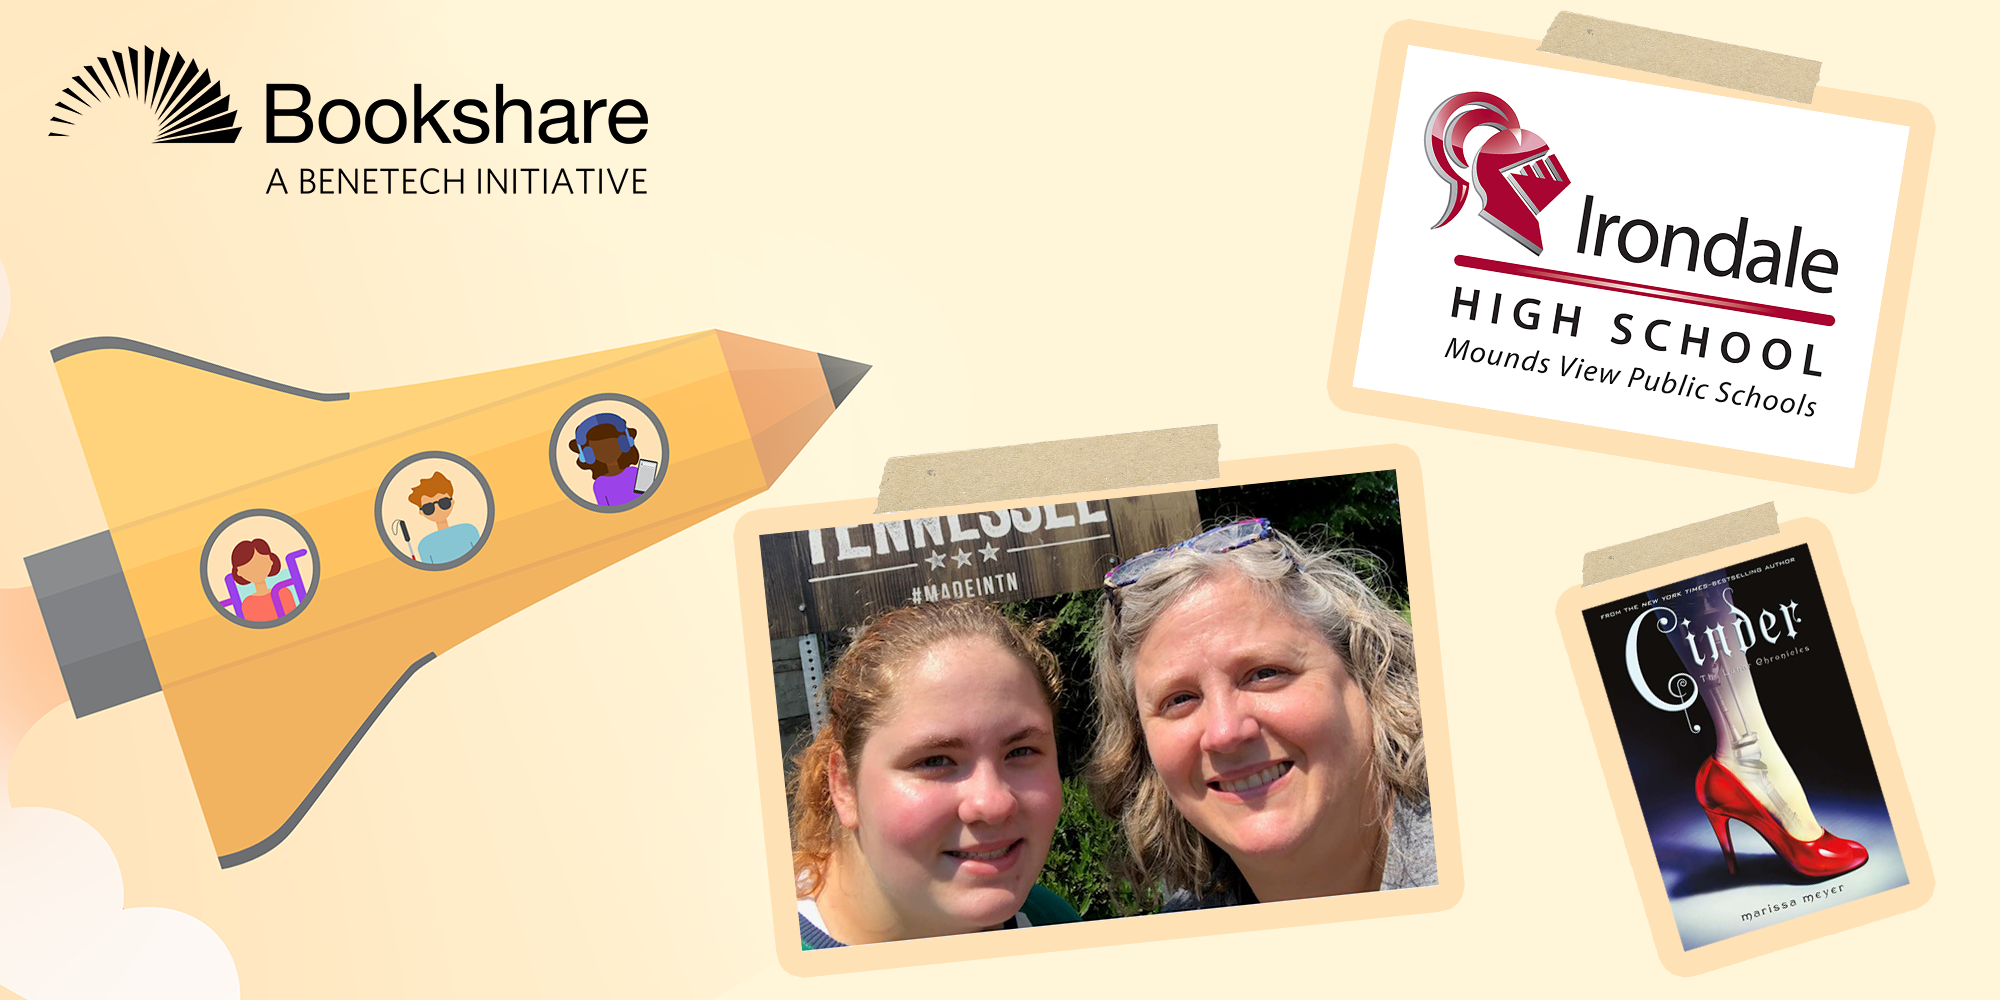 A collection of images show Ella and Beth, the Irondale high school logo, the Cinder book cover, the Bookshare logo, and the Launch into Learning rocket ship